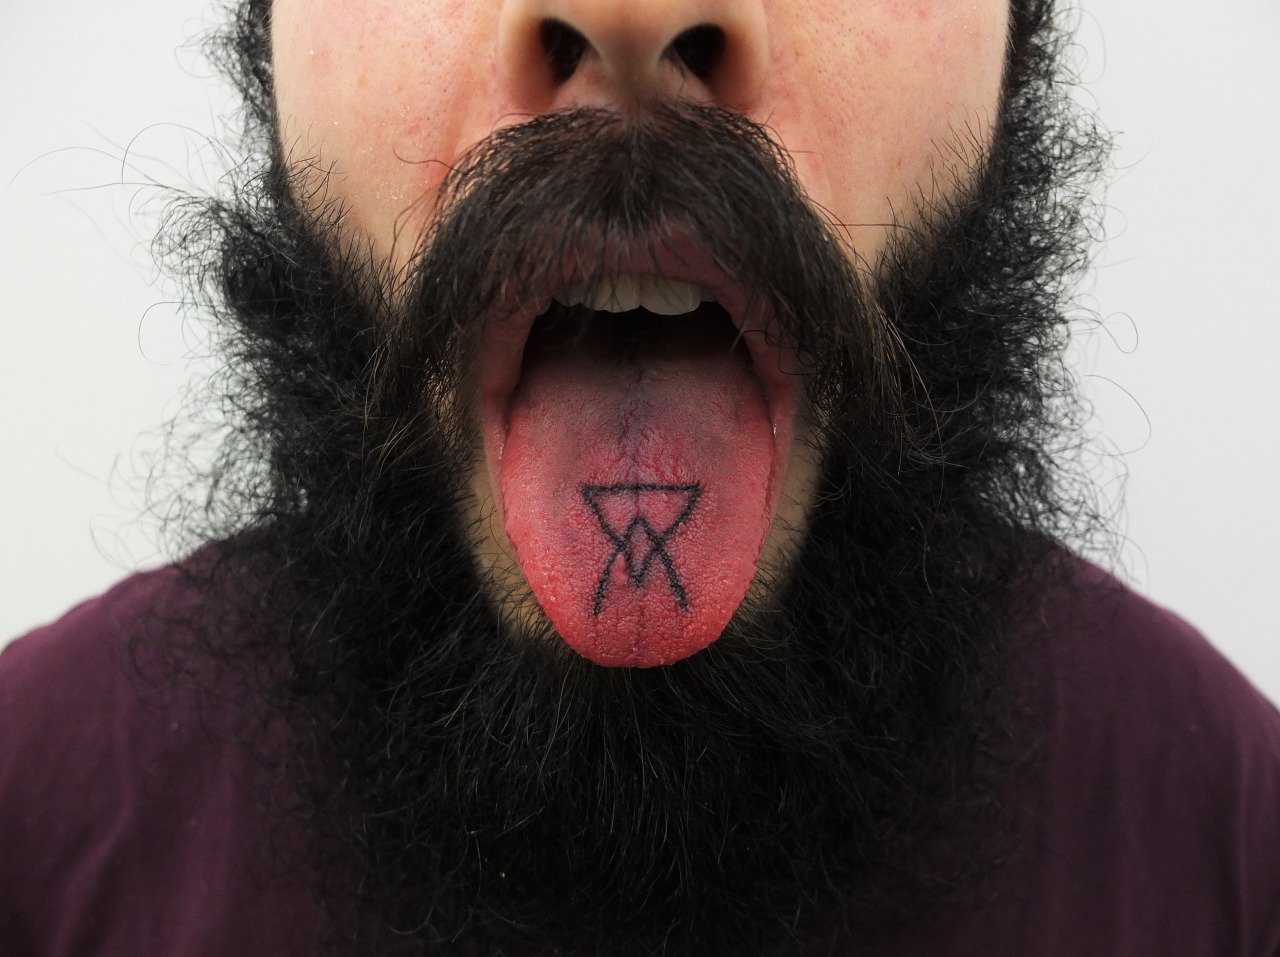 HOKUS POKUS: Handpoked Arsenic tongue tattoo for a friend, not...